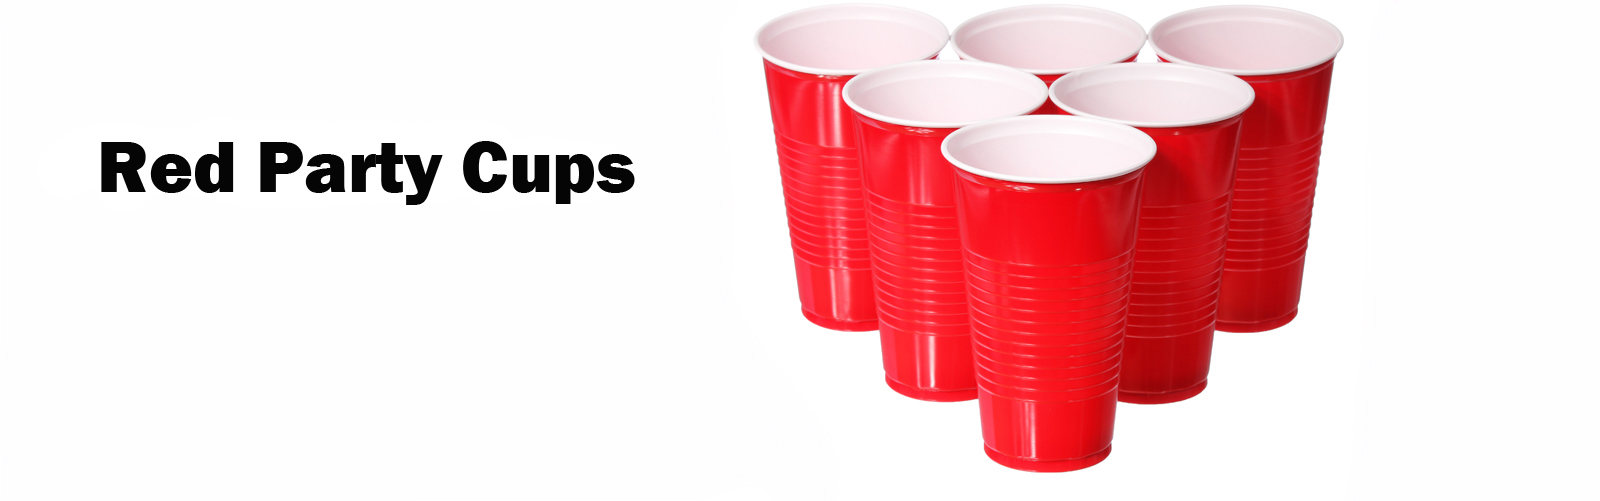 16oz red plastic party cups